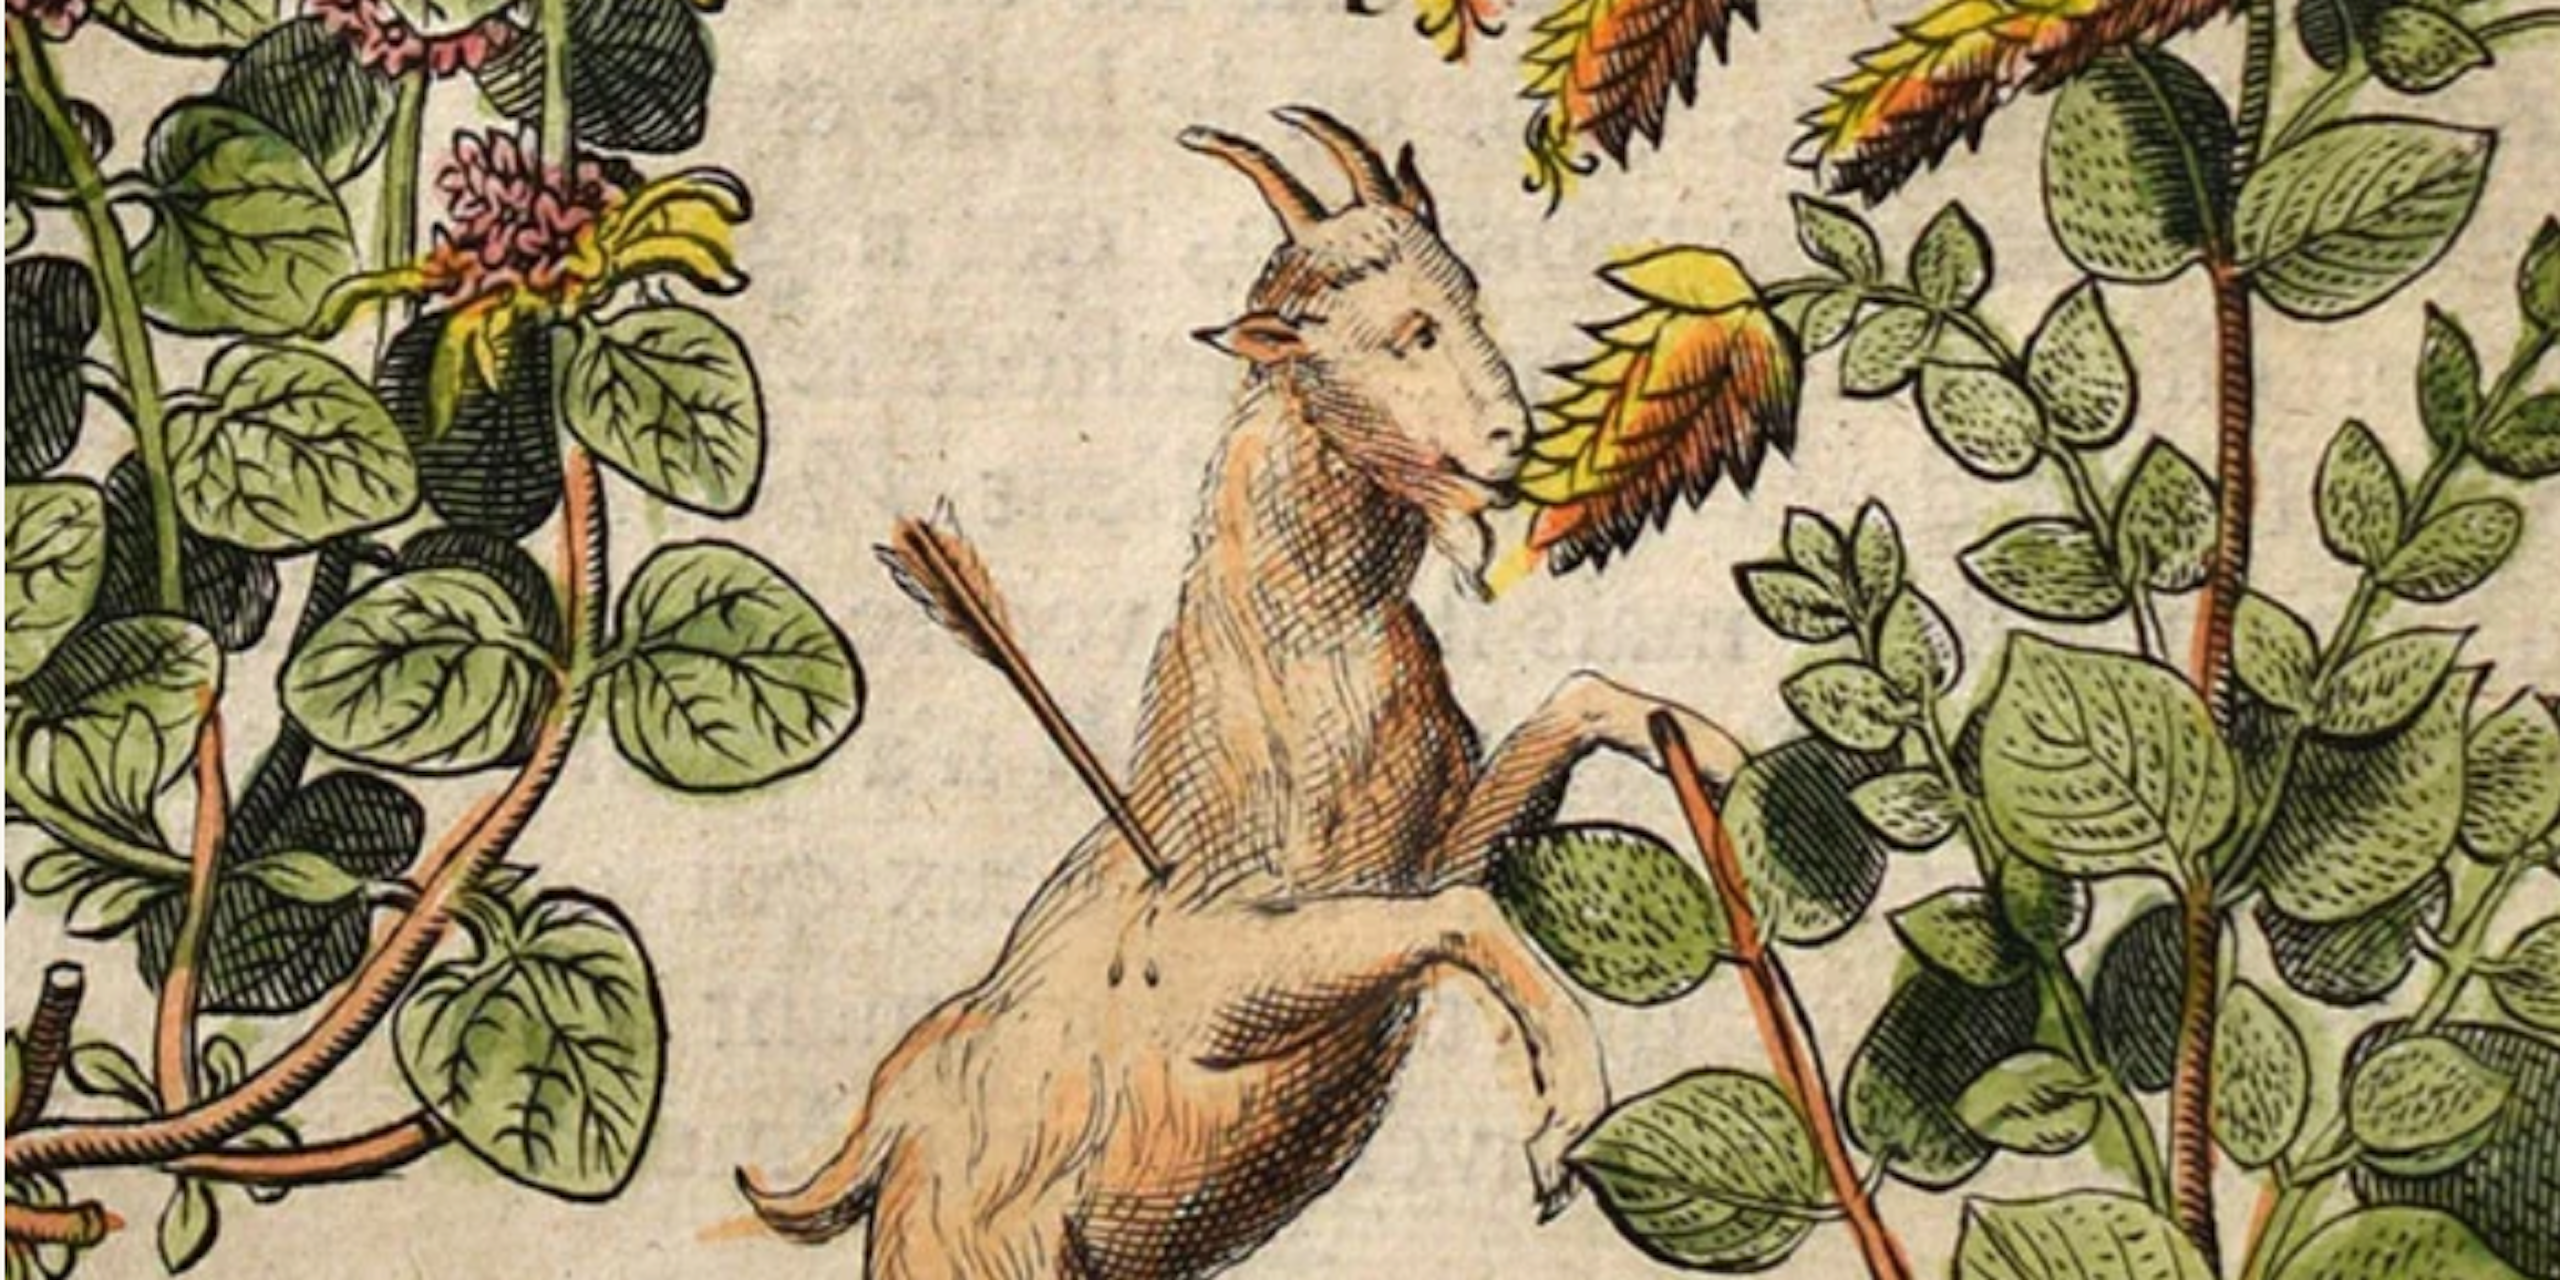 print of a goat on hind legs with arrow in its side eating from a tall plant